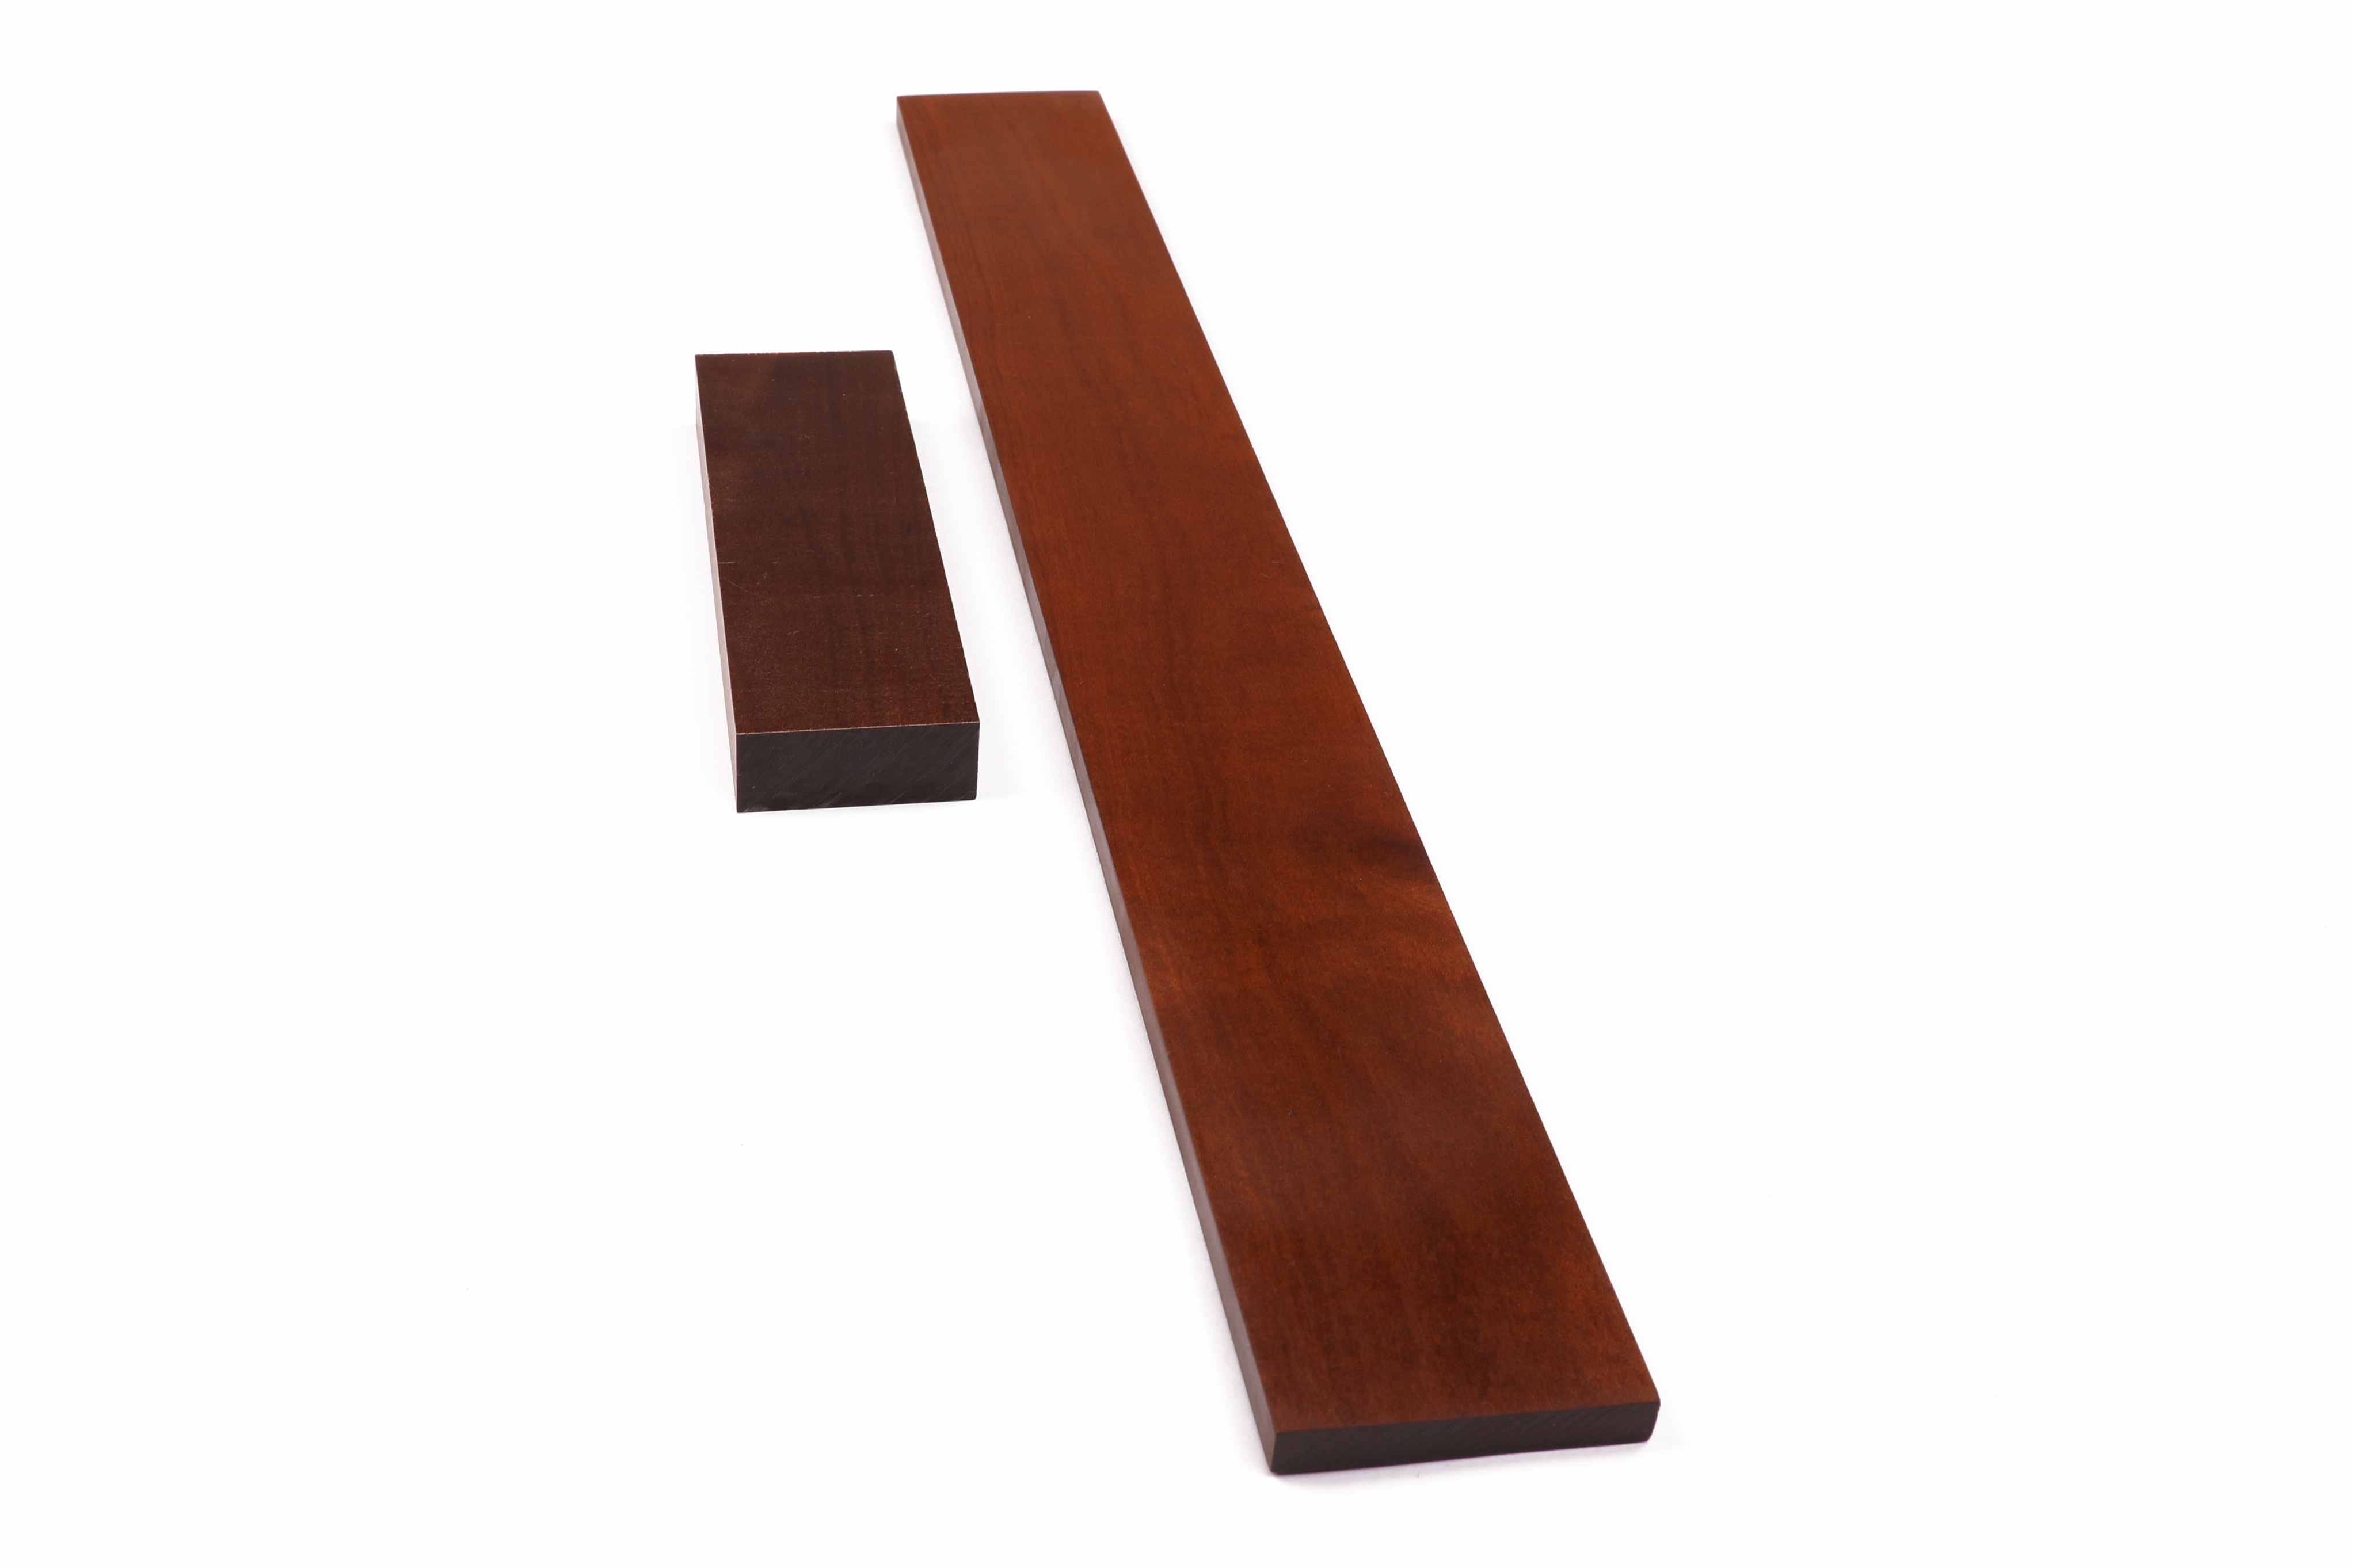 Bridge and fretboard square timber from Sonowood maple